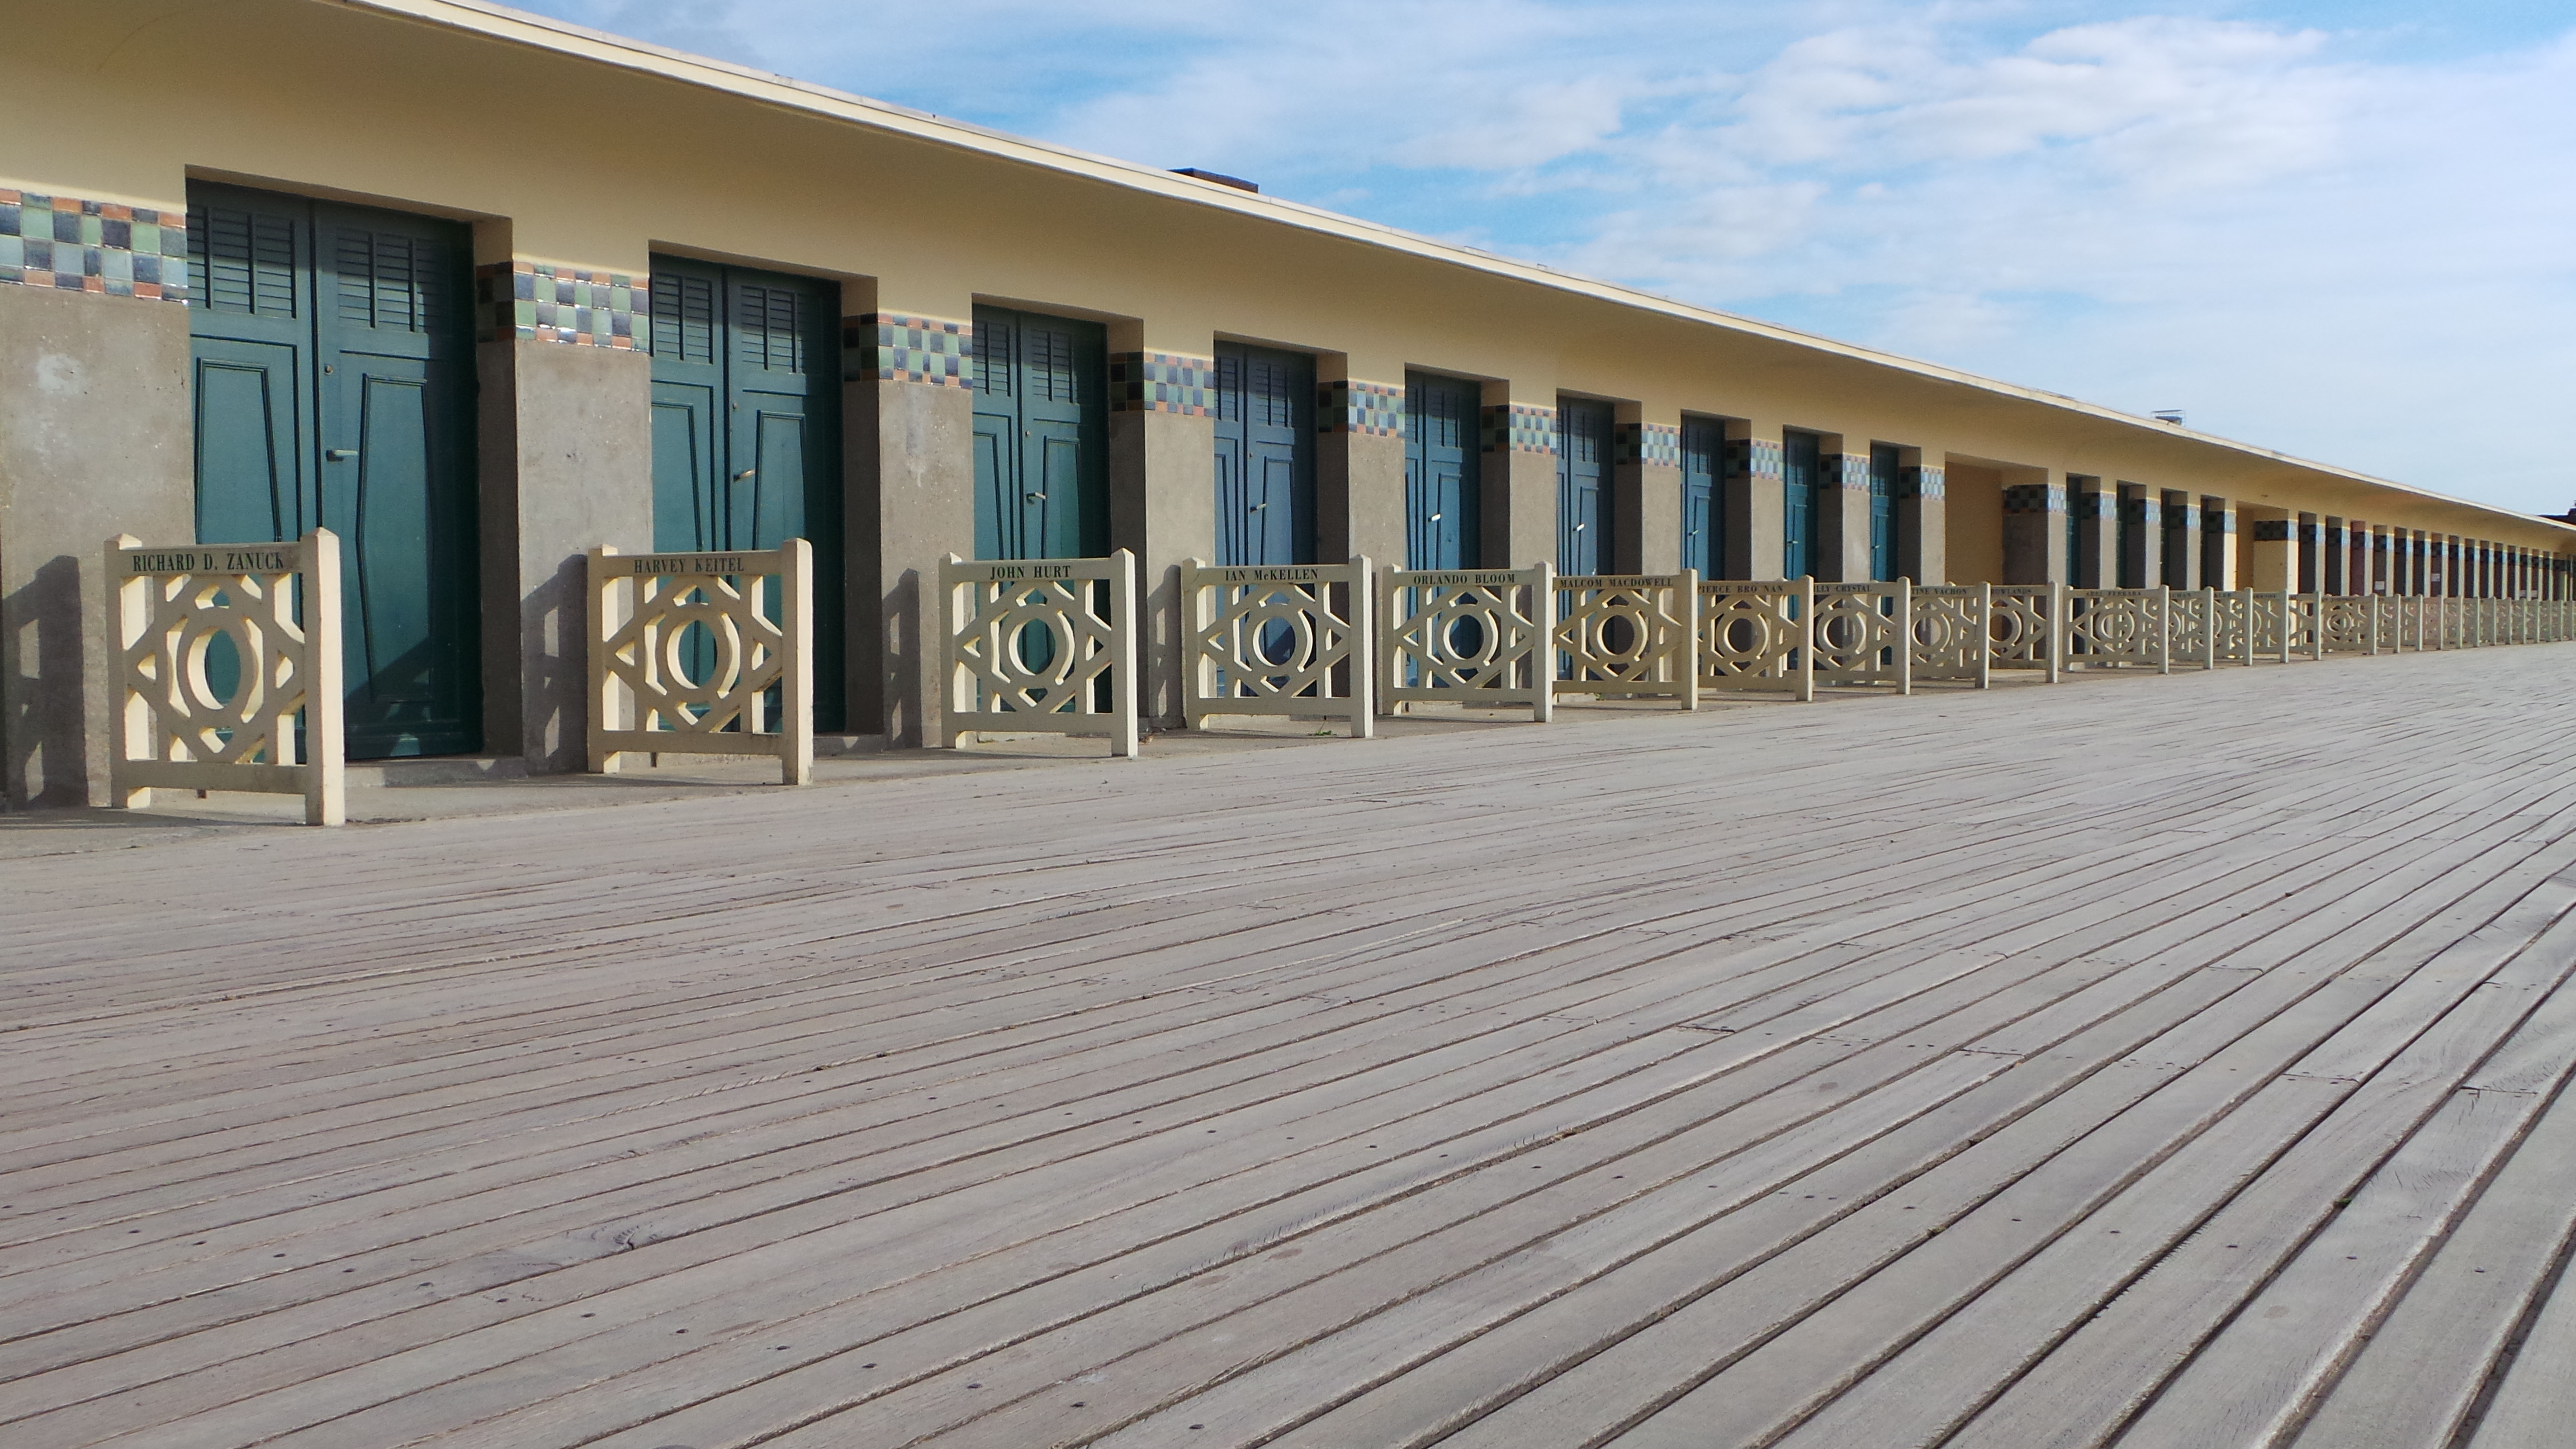 DEAUVILLE - visiter Deauville Plage Planches Luxe Normandie Normandy - copyright Go with the Blog 20160725_192815